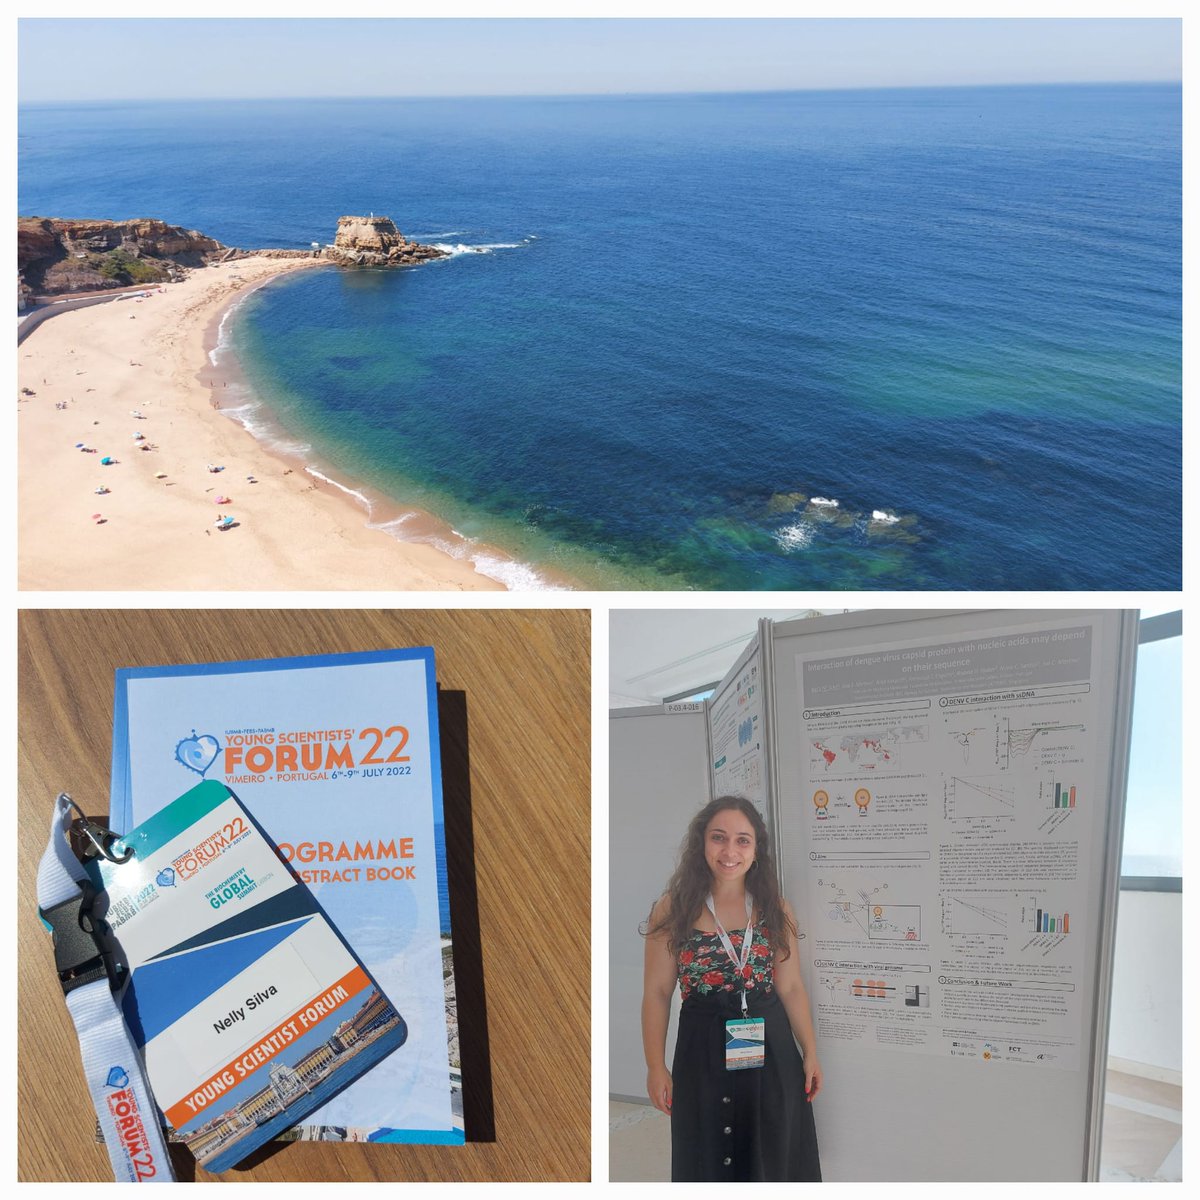 @nellymcsilva spent her last days in the #ysf2022, held at the beautiful Vimeiro, with amazing scientists from all over the world. Great opportunity and excellent environment to discuss science. 
#NSantosLab @IMMolecular
@iubmb @FEBSnews @pabmb_official